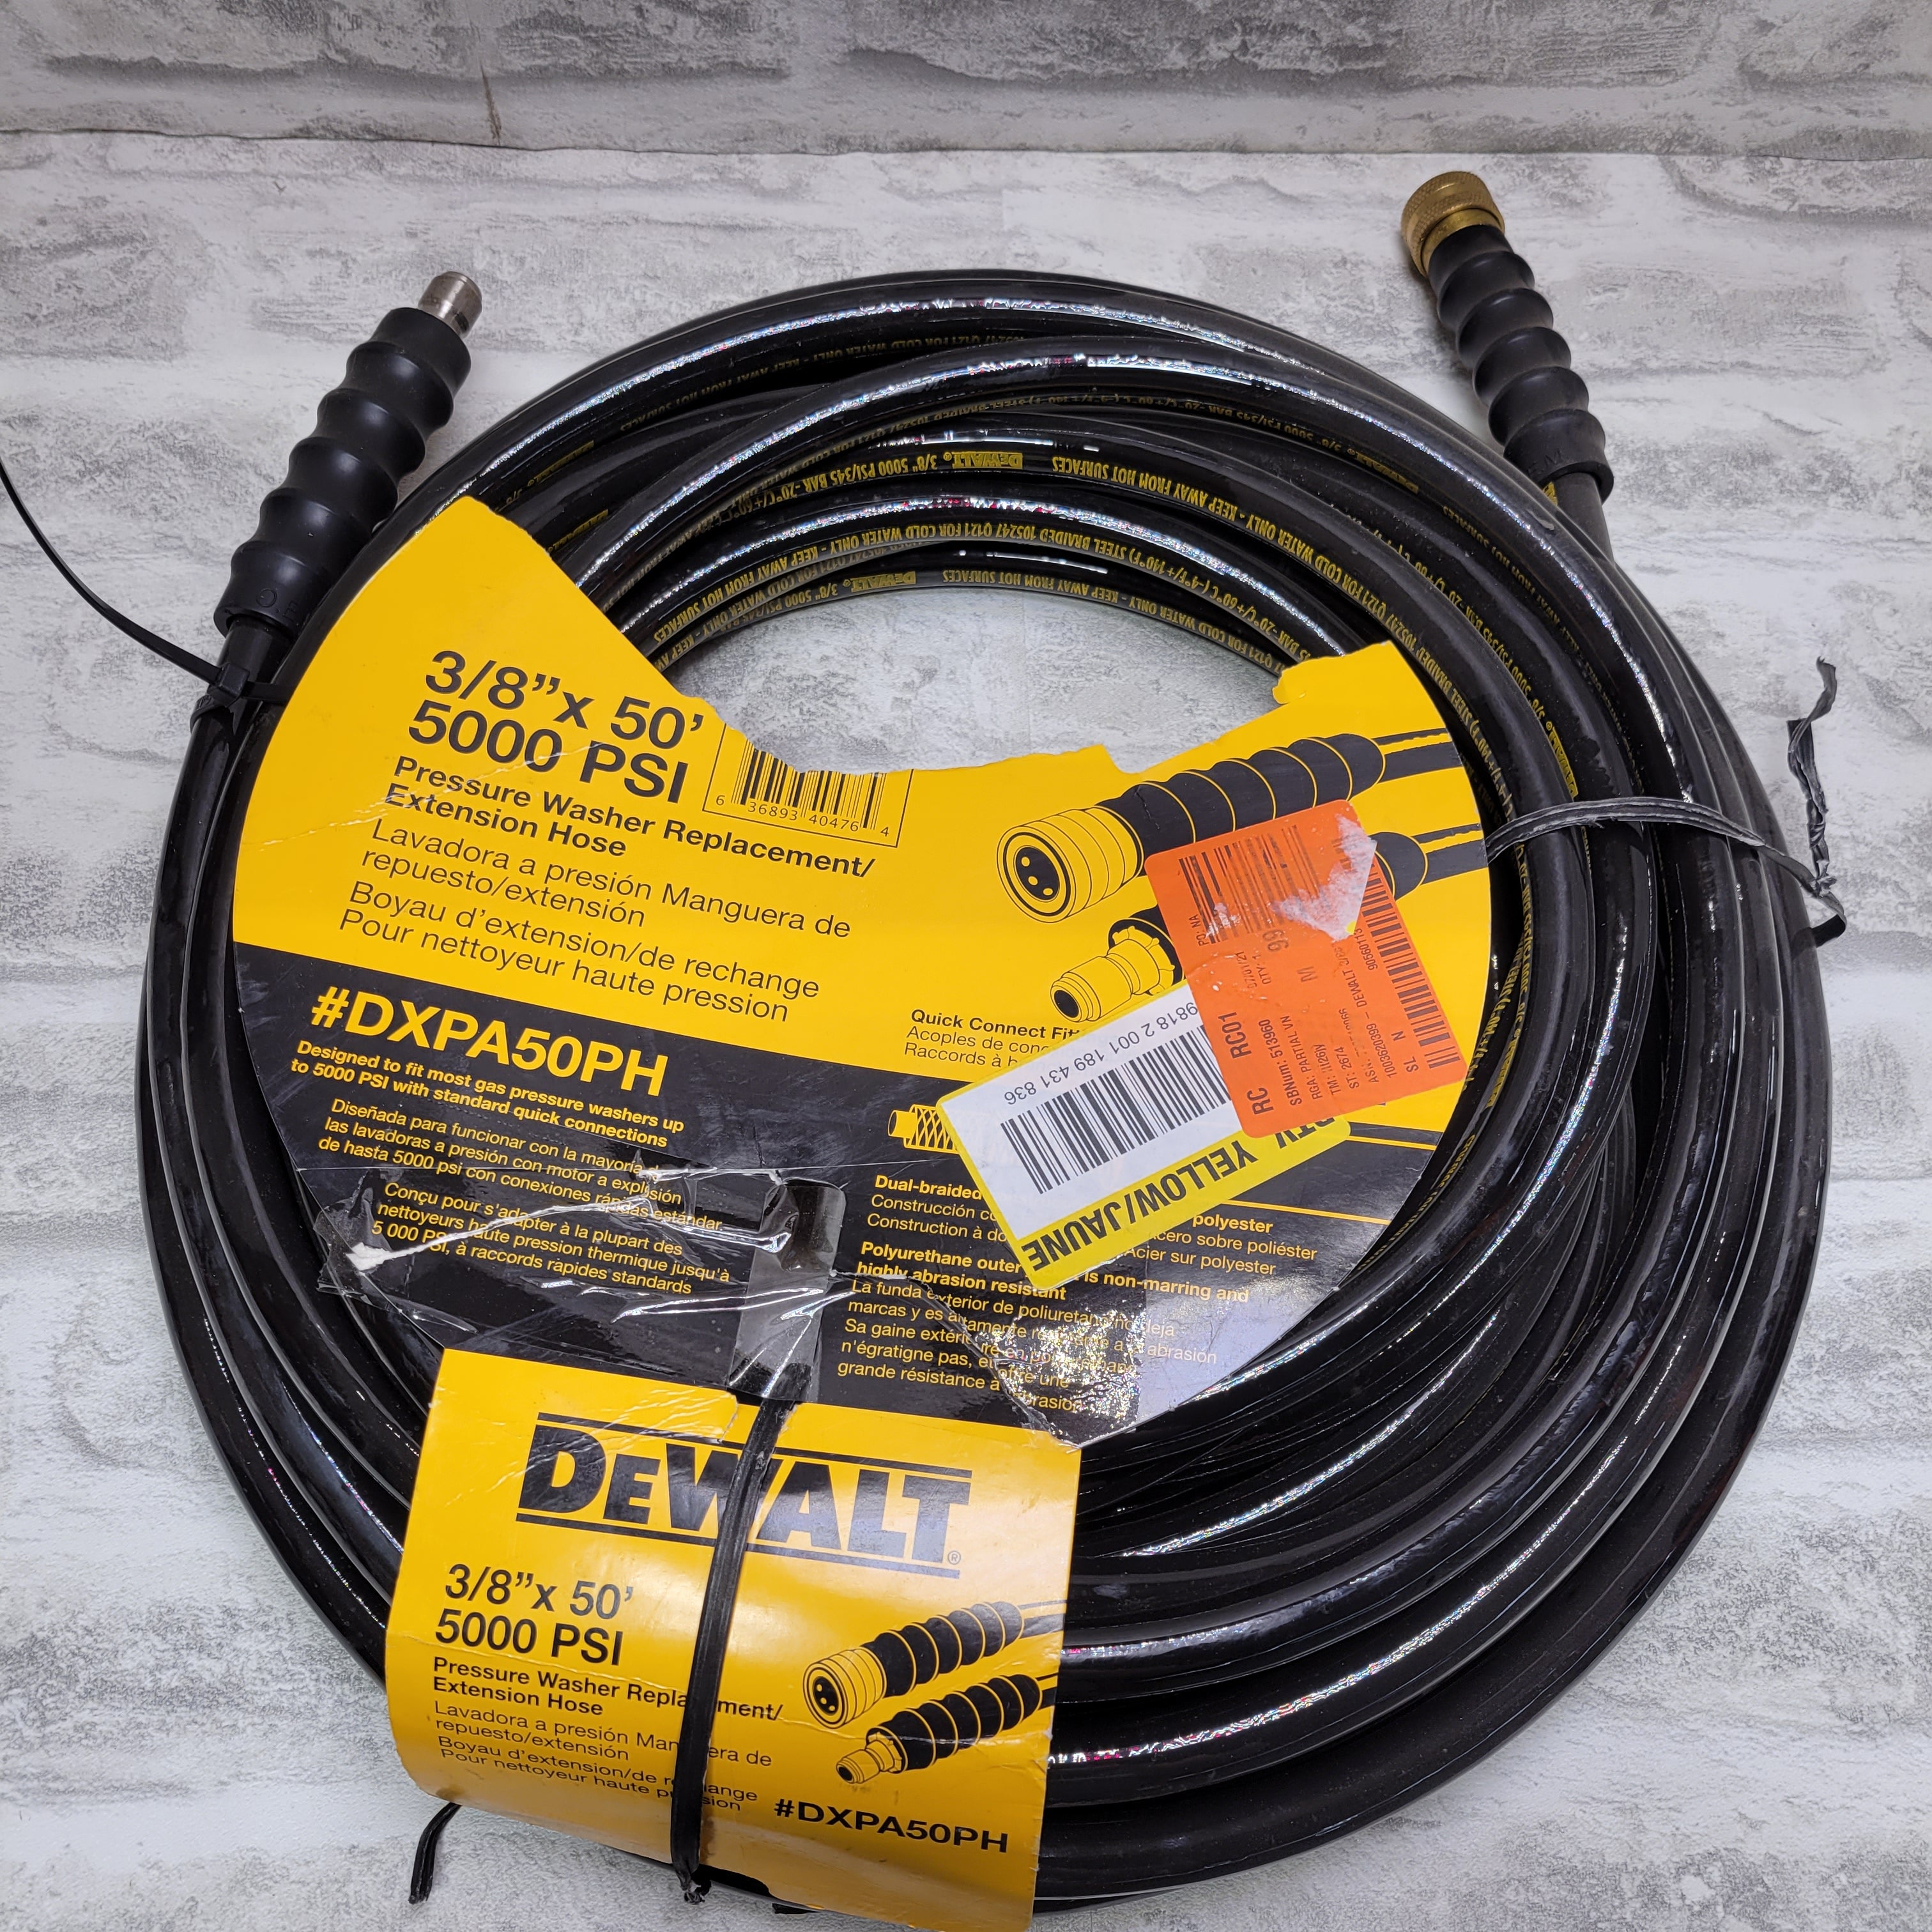 DEWALT 3/8 in. x 50 ft. 5000 PSI Replacement/Extension Hose (7624184955118)